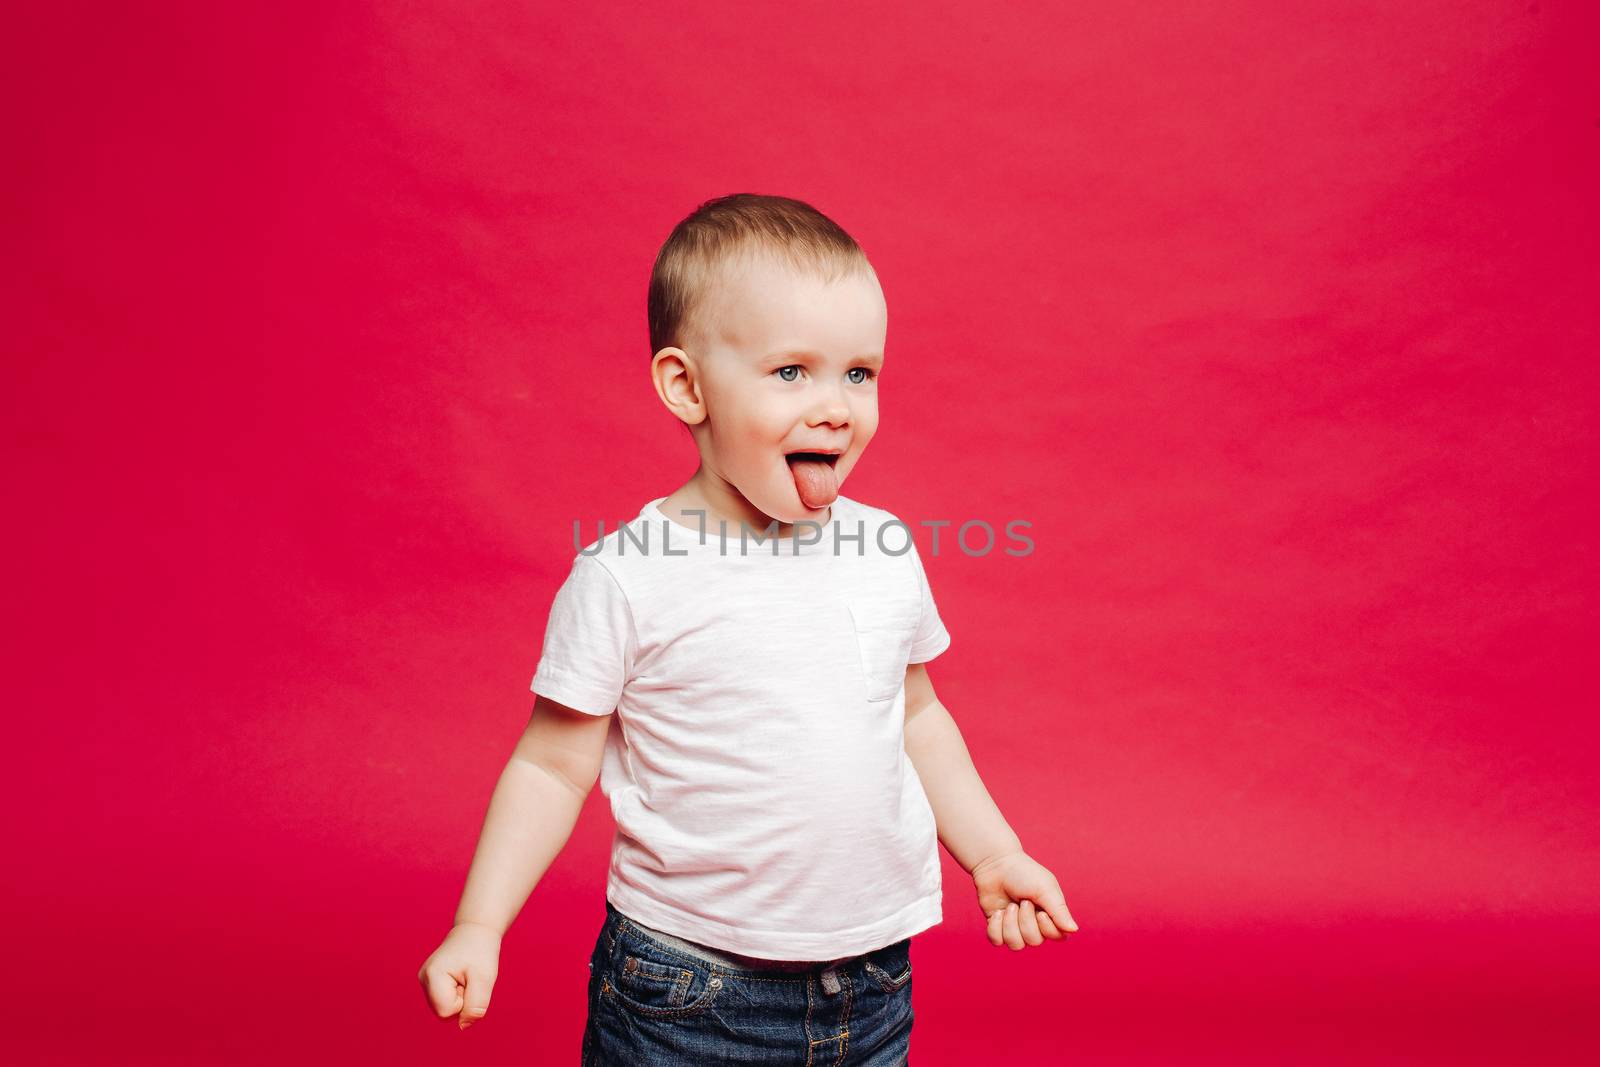 Sweet little emotion boy playing at studio and showing tongue out, looking away. Kid stick out and making face, posing away. Pink studio background. Concept kids fashion.